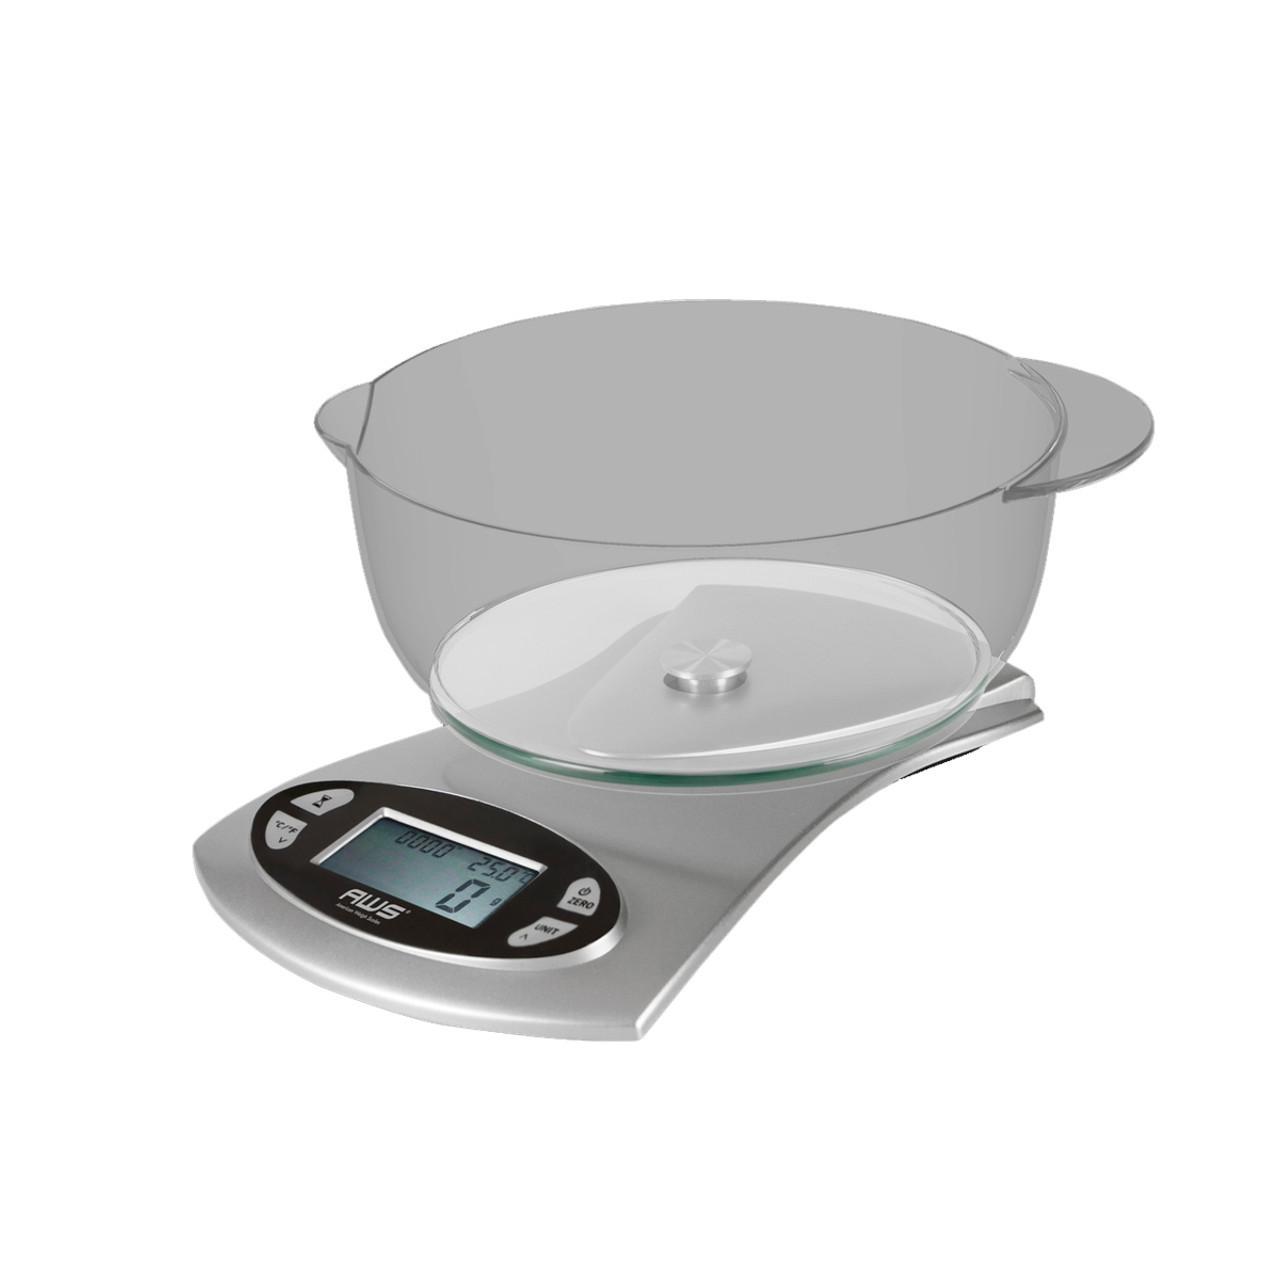 Kitchen Scale White Large 5kg Weighing Appliance Gadget